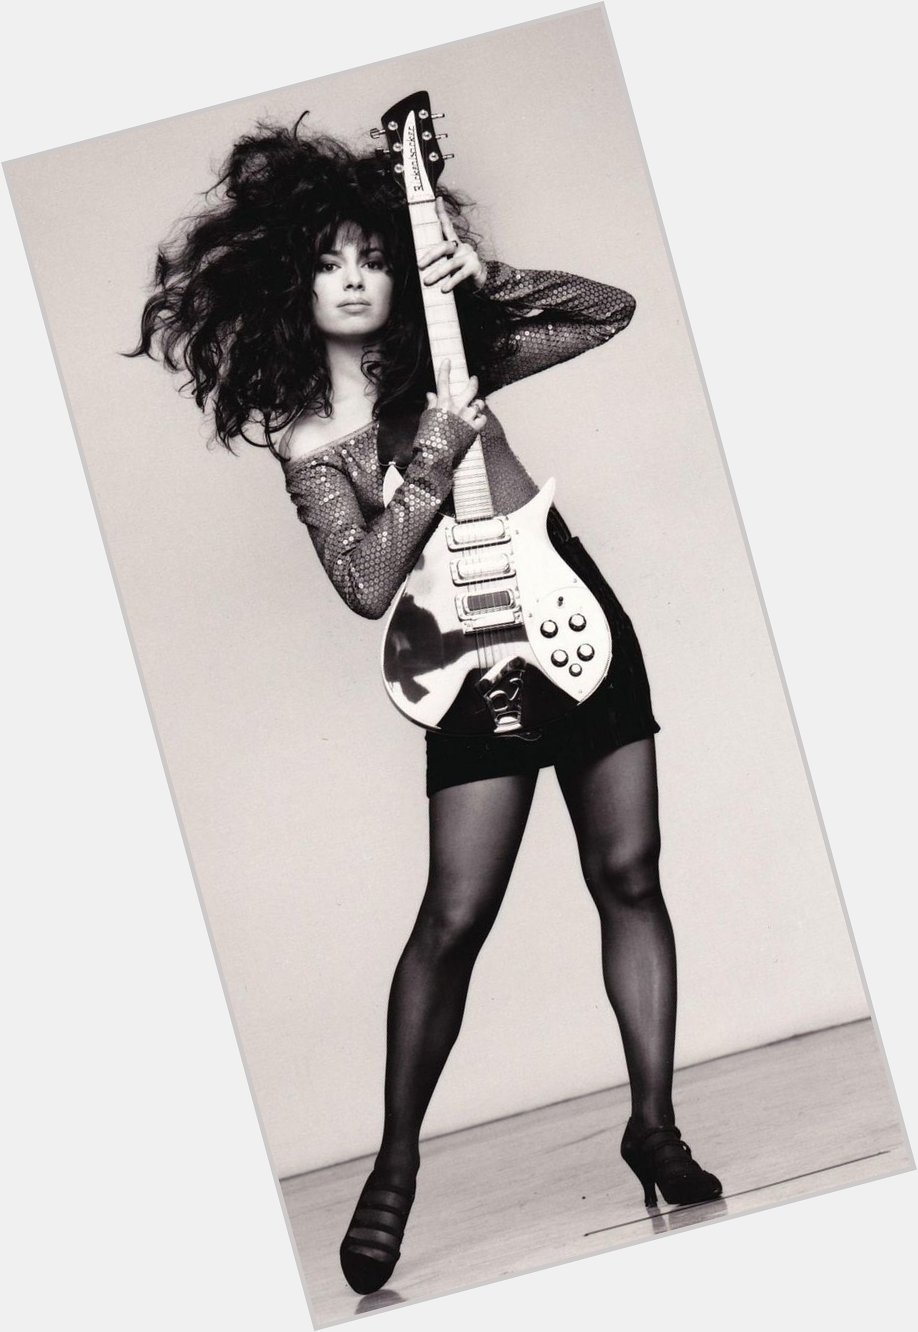 On this I just wanna say Happy Birthday to Susanna Hoffs, who has never ceased to be amazing 